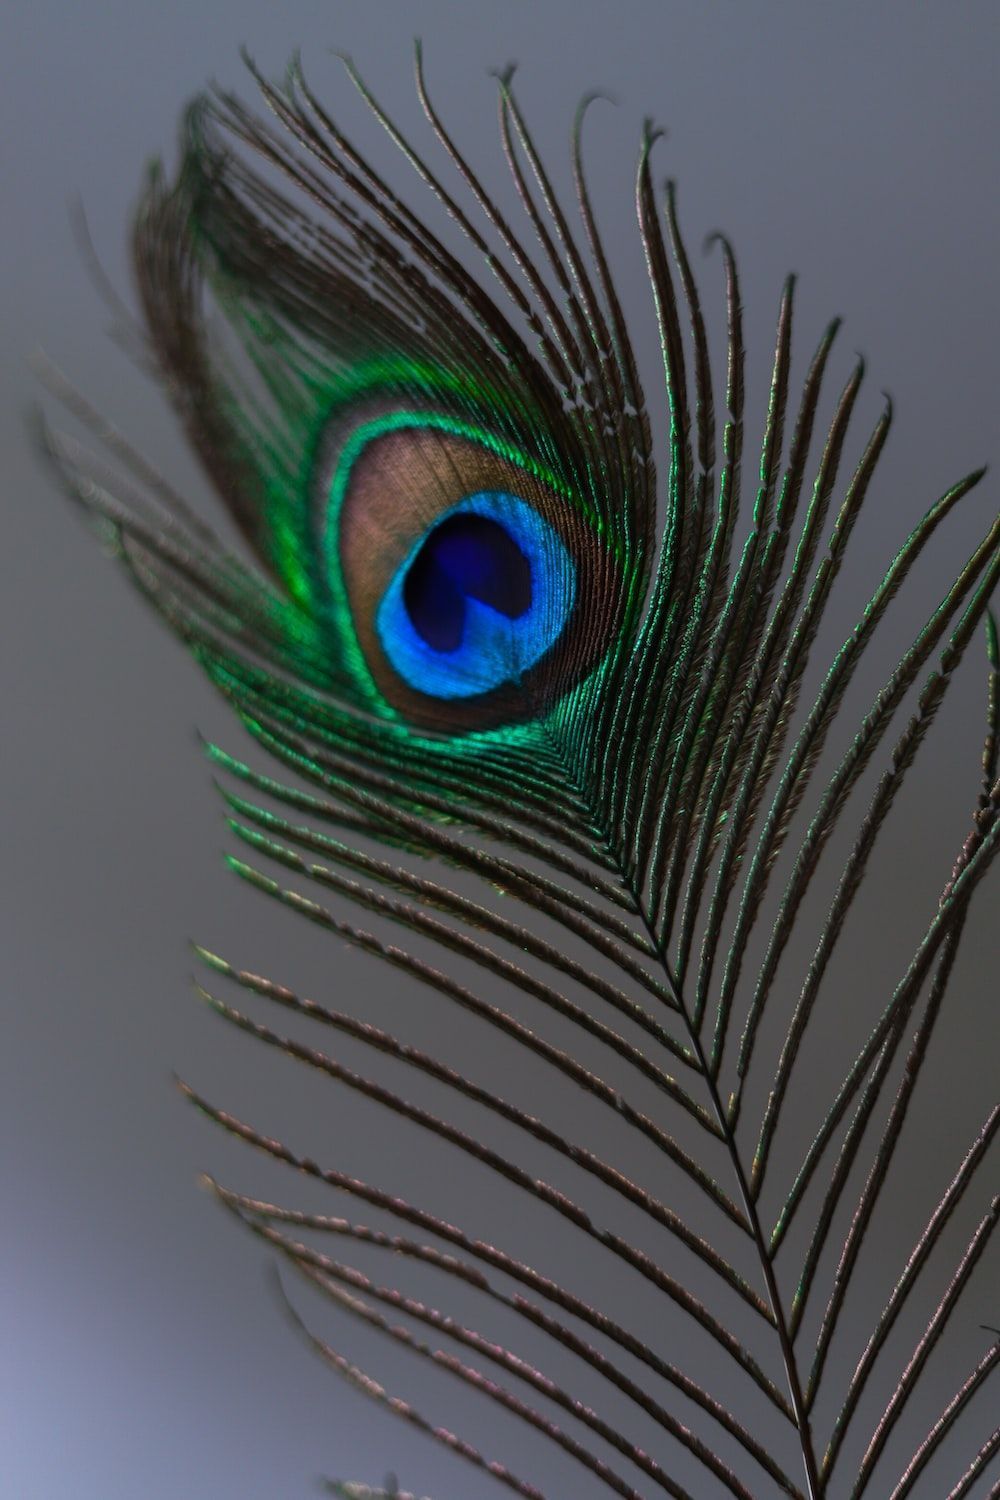 A peacock feather with the blue eye looking at the camera - Peacock, feathers